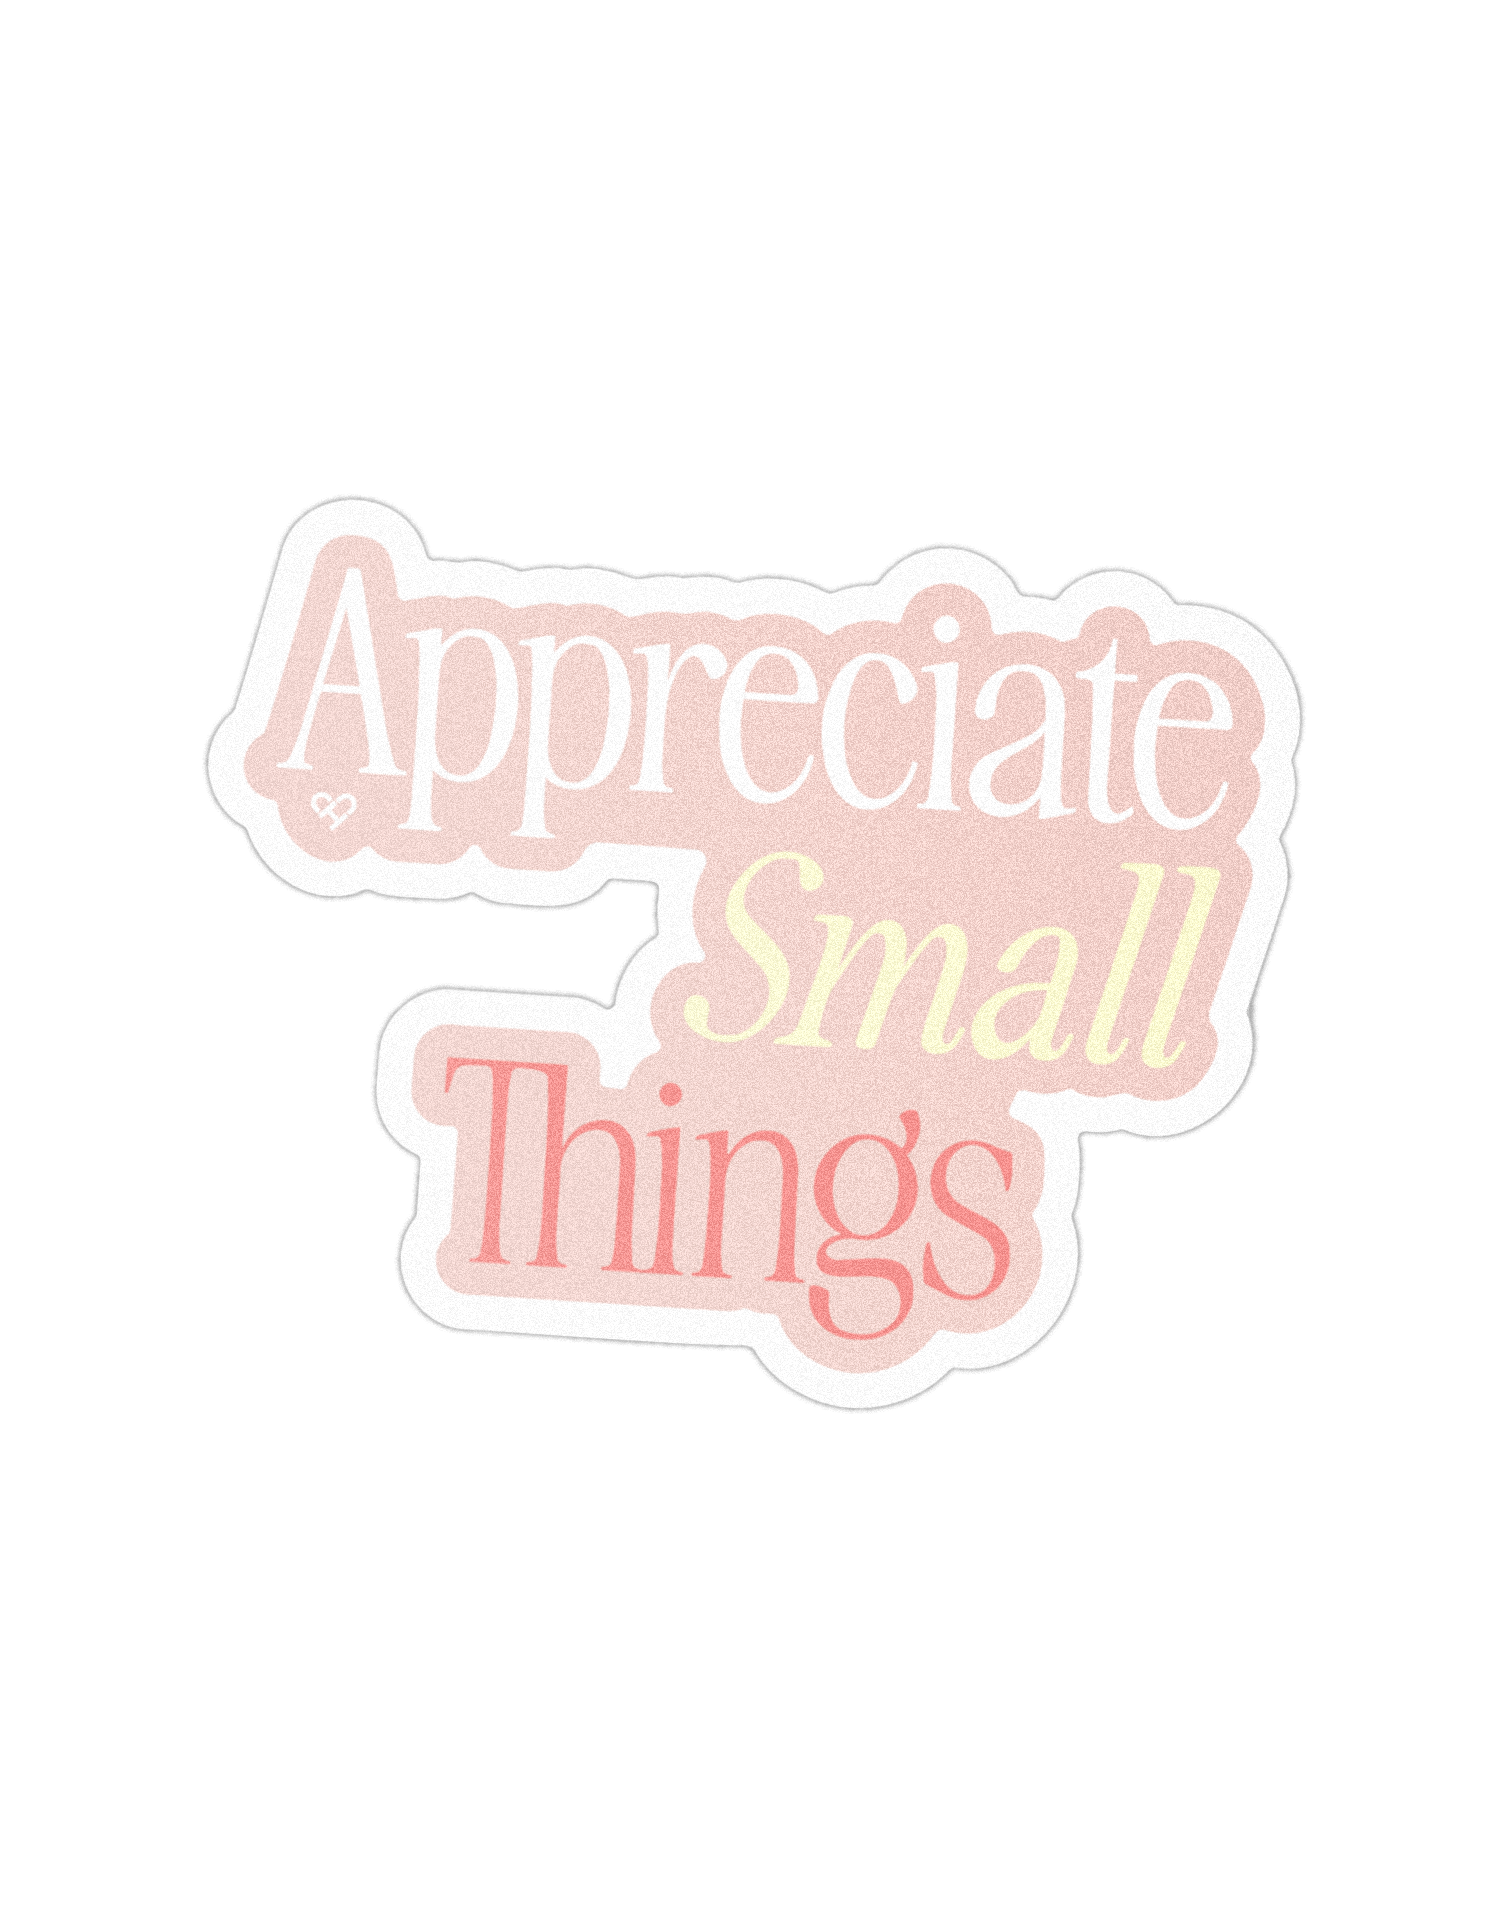 Appreciate-small-things.png